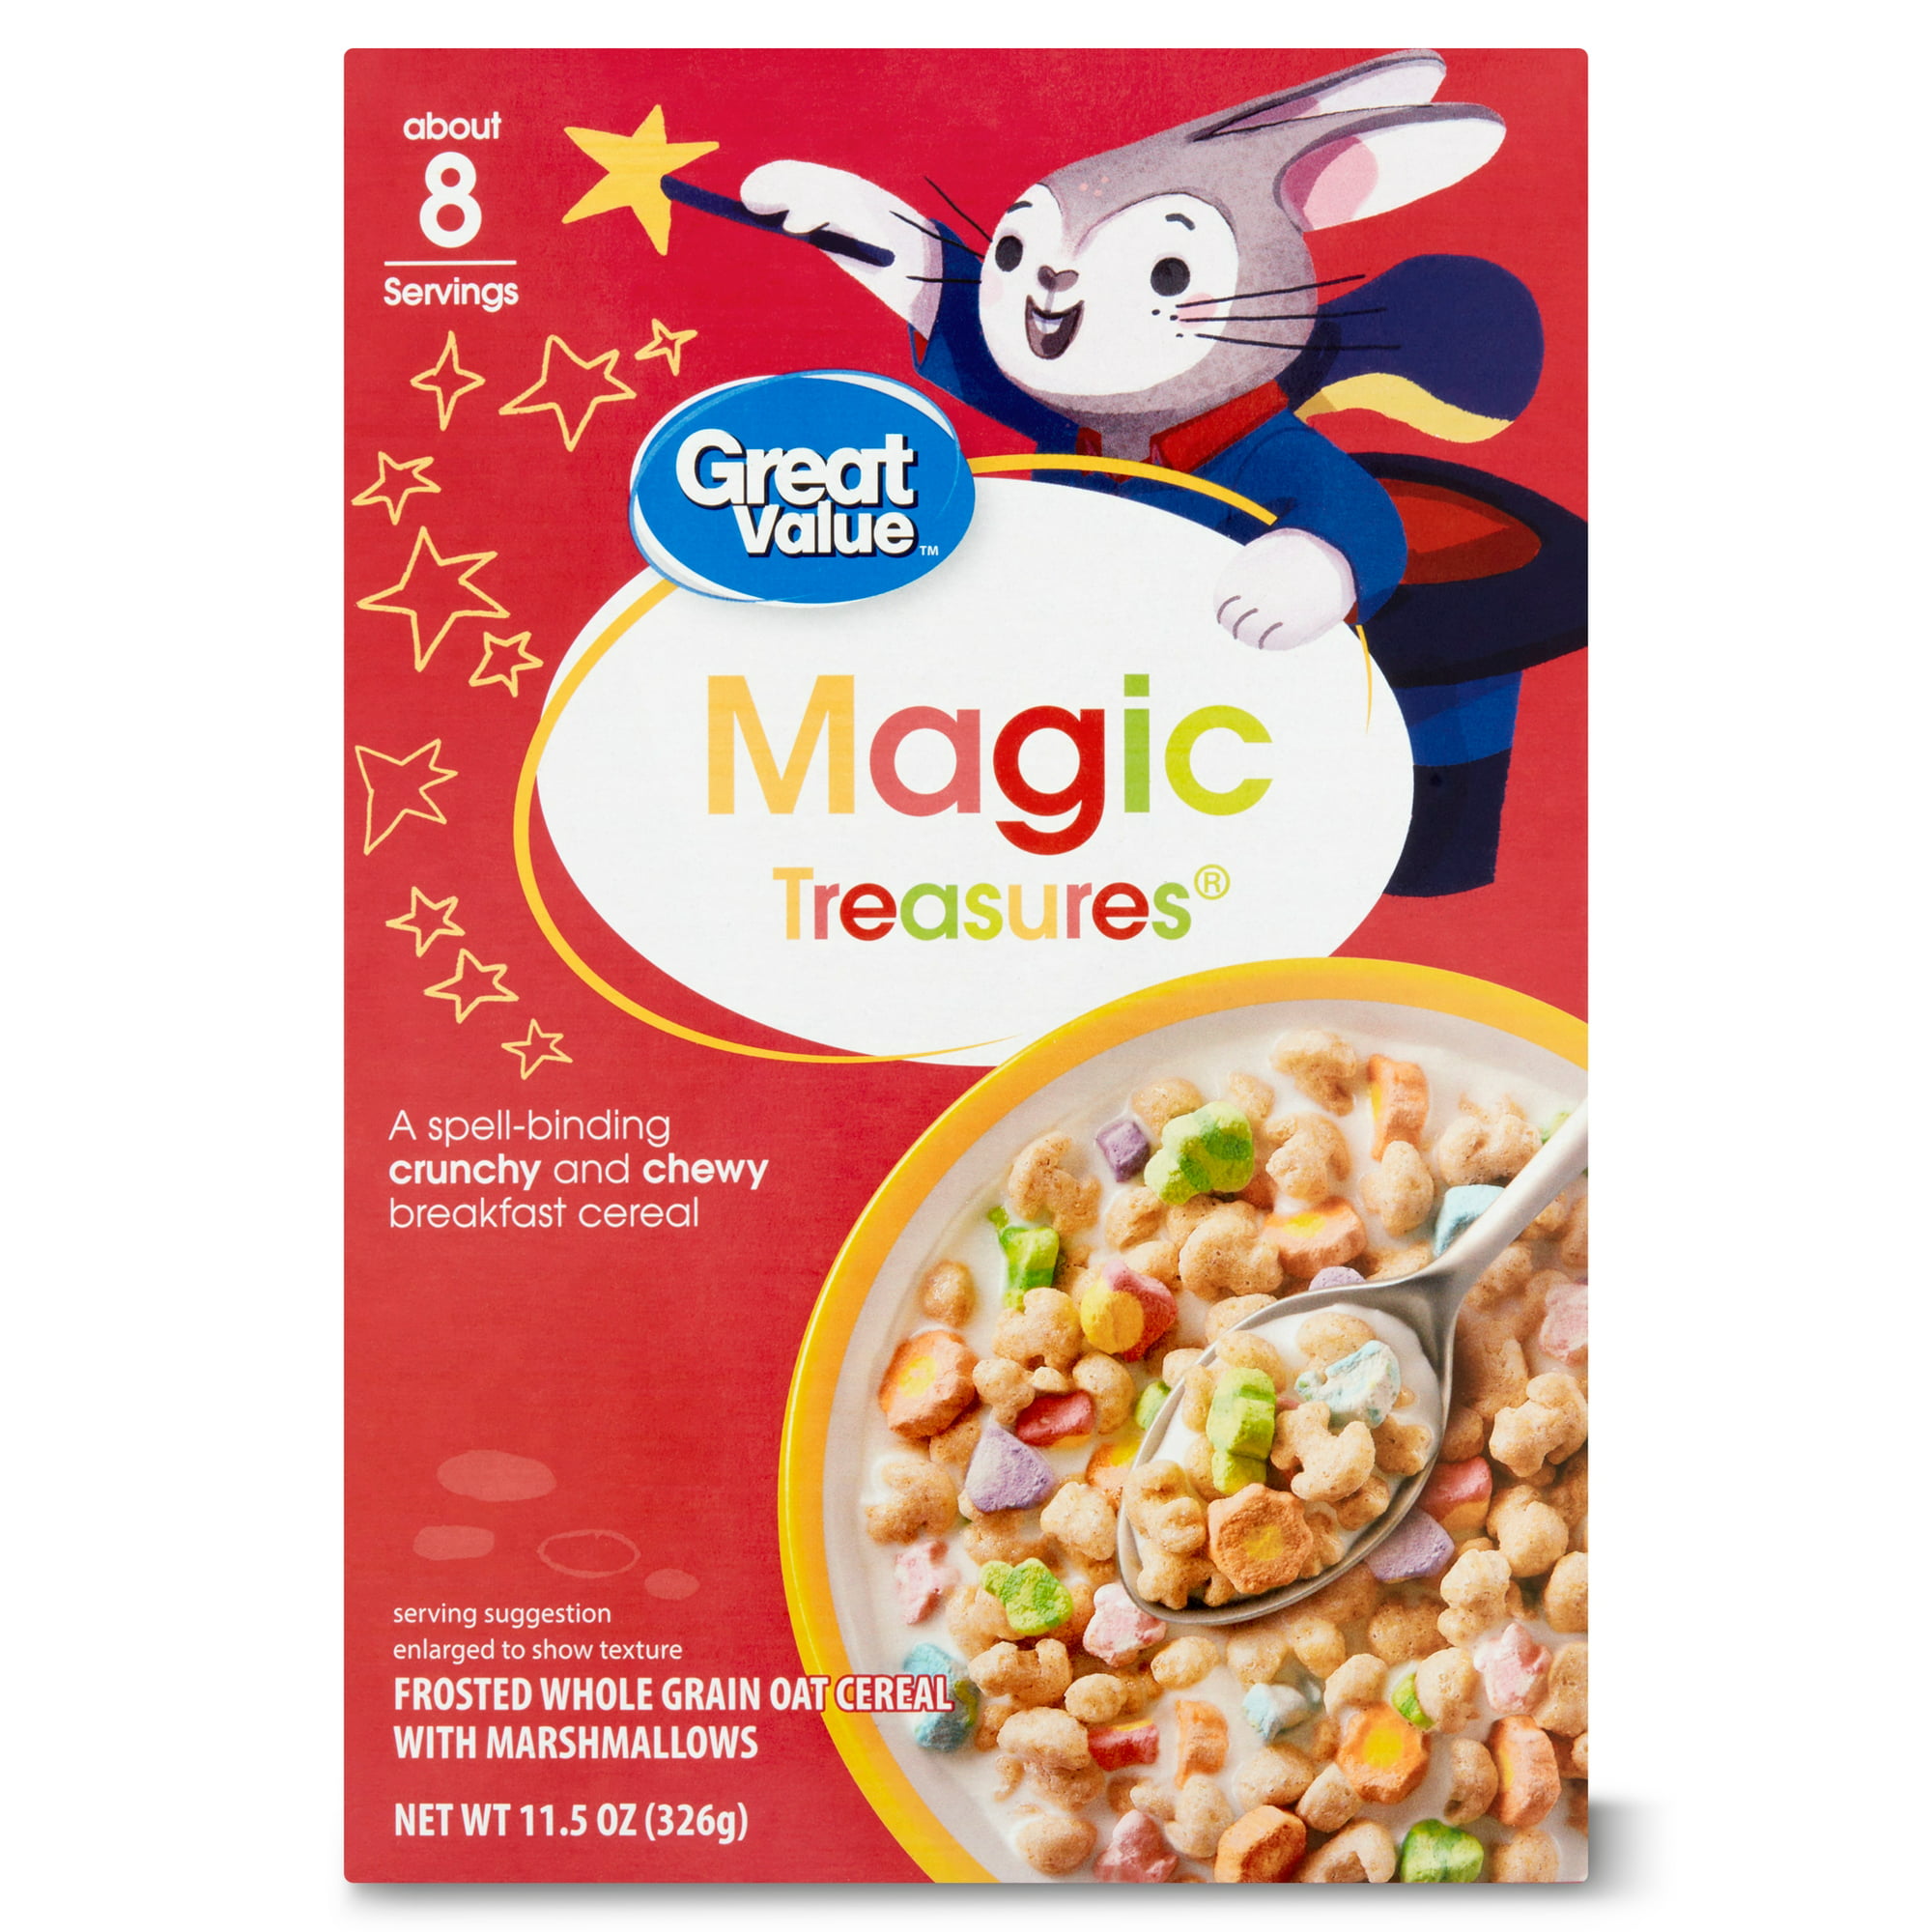 Great Value Magic Treasures Whole Grain Oat with Marshmallow Cereal, 11.5 oz